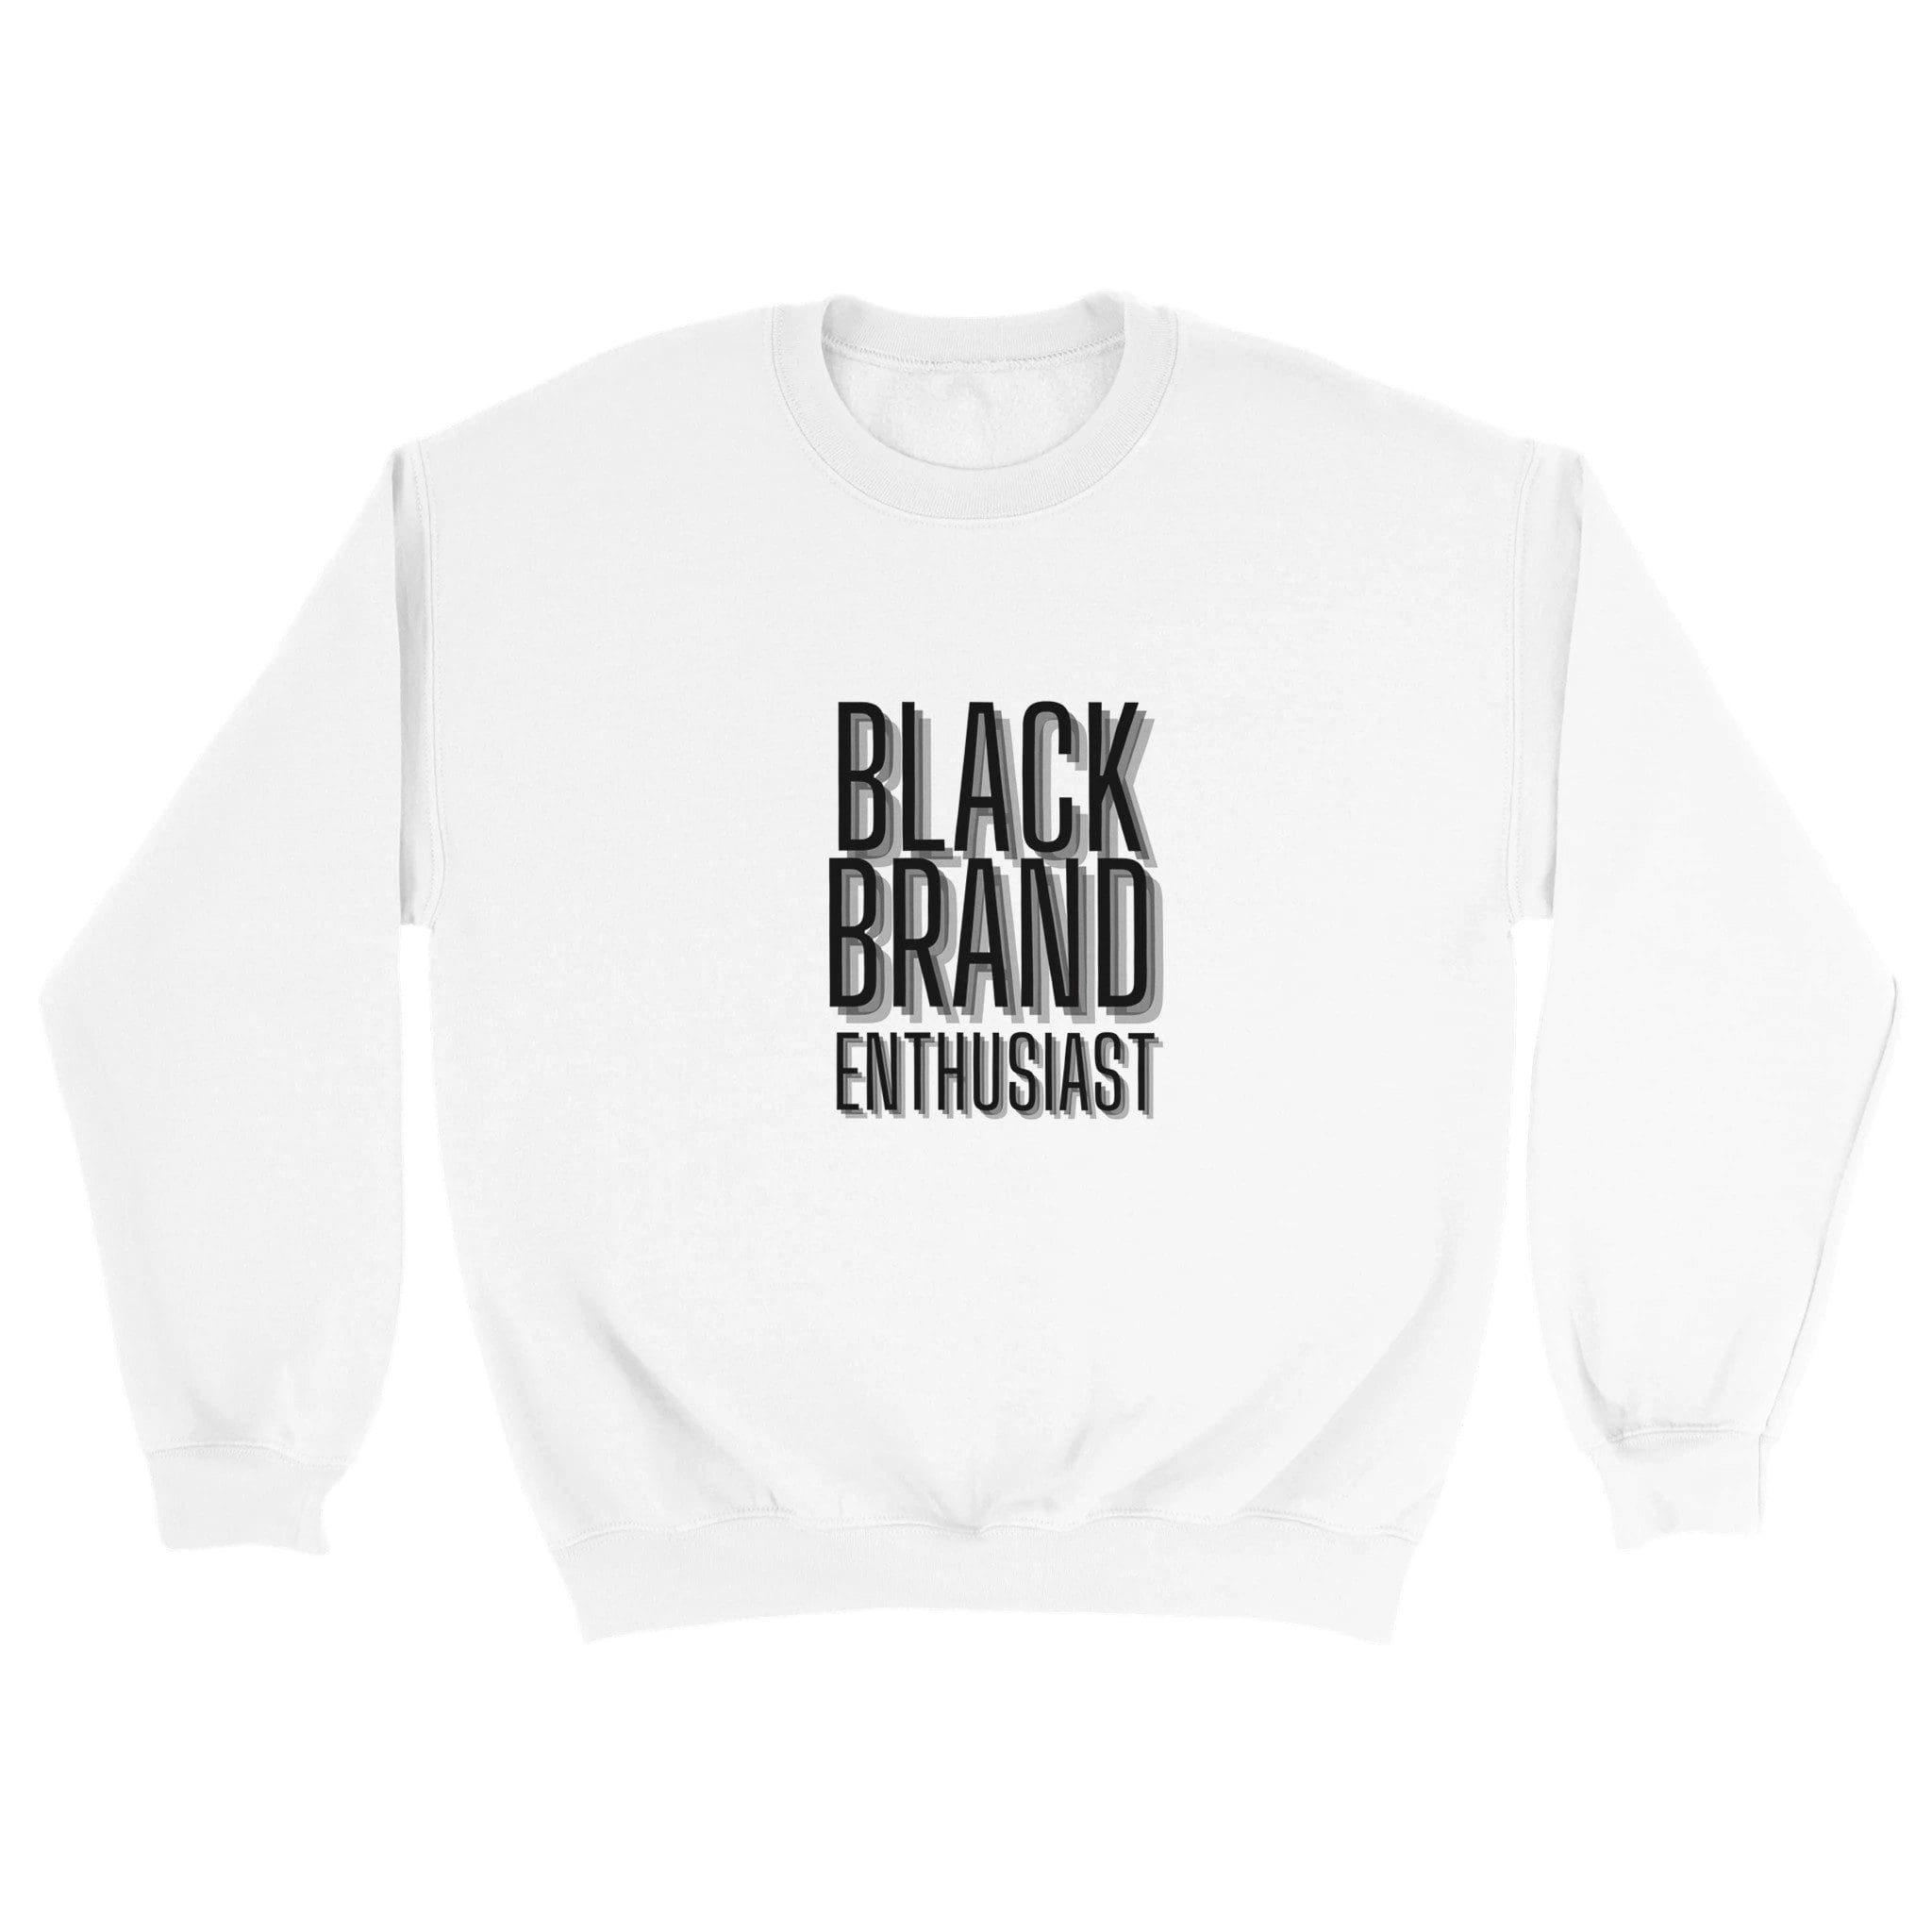 A white sweatshirt from a black-owned brand called Black Brand Enthusiast Classic Unisex Crewneck Sweatshirt, available on Safi Marketplace.